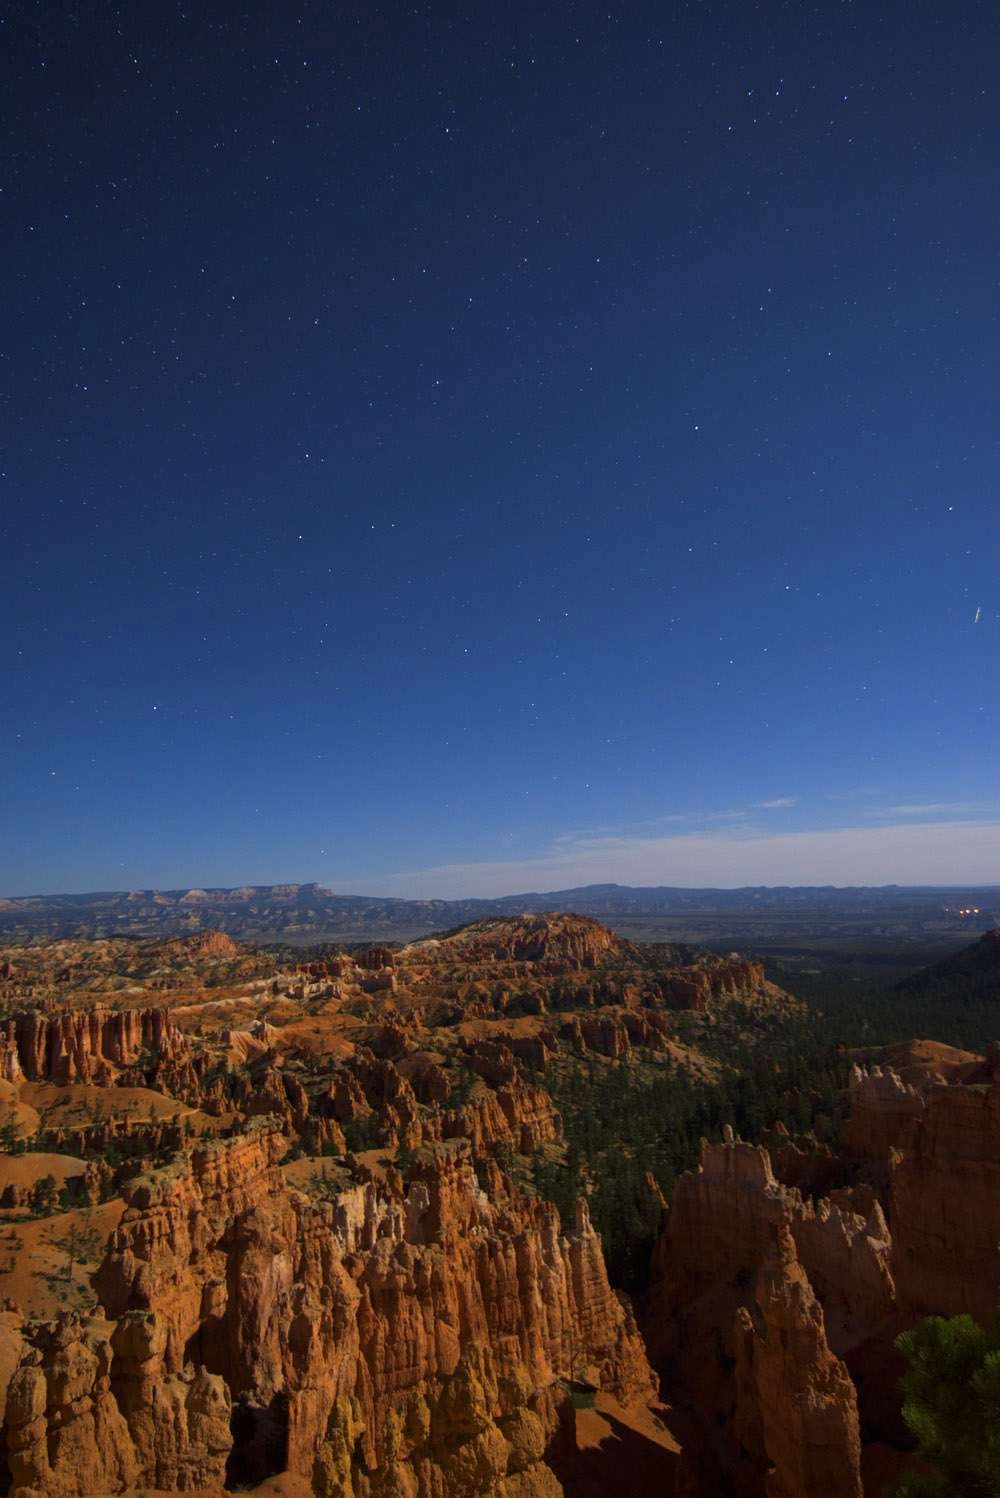 Later in the evening as the stars become visible over bryce canyon. © robert lowdon